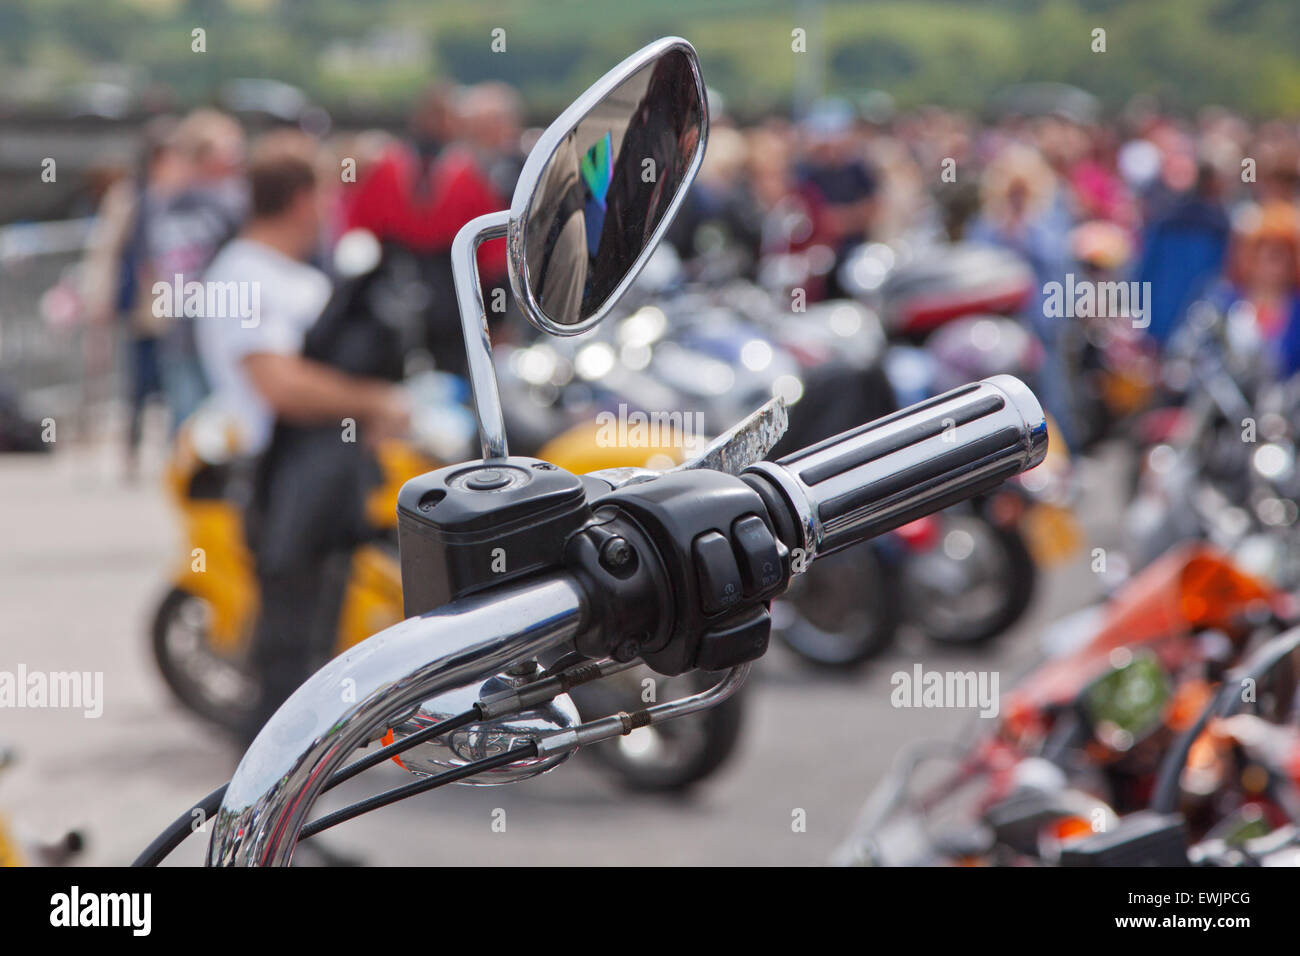 One of the wing mirrors and hand controls of a parked motorcycle at a bike rally in UK Stock Photo